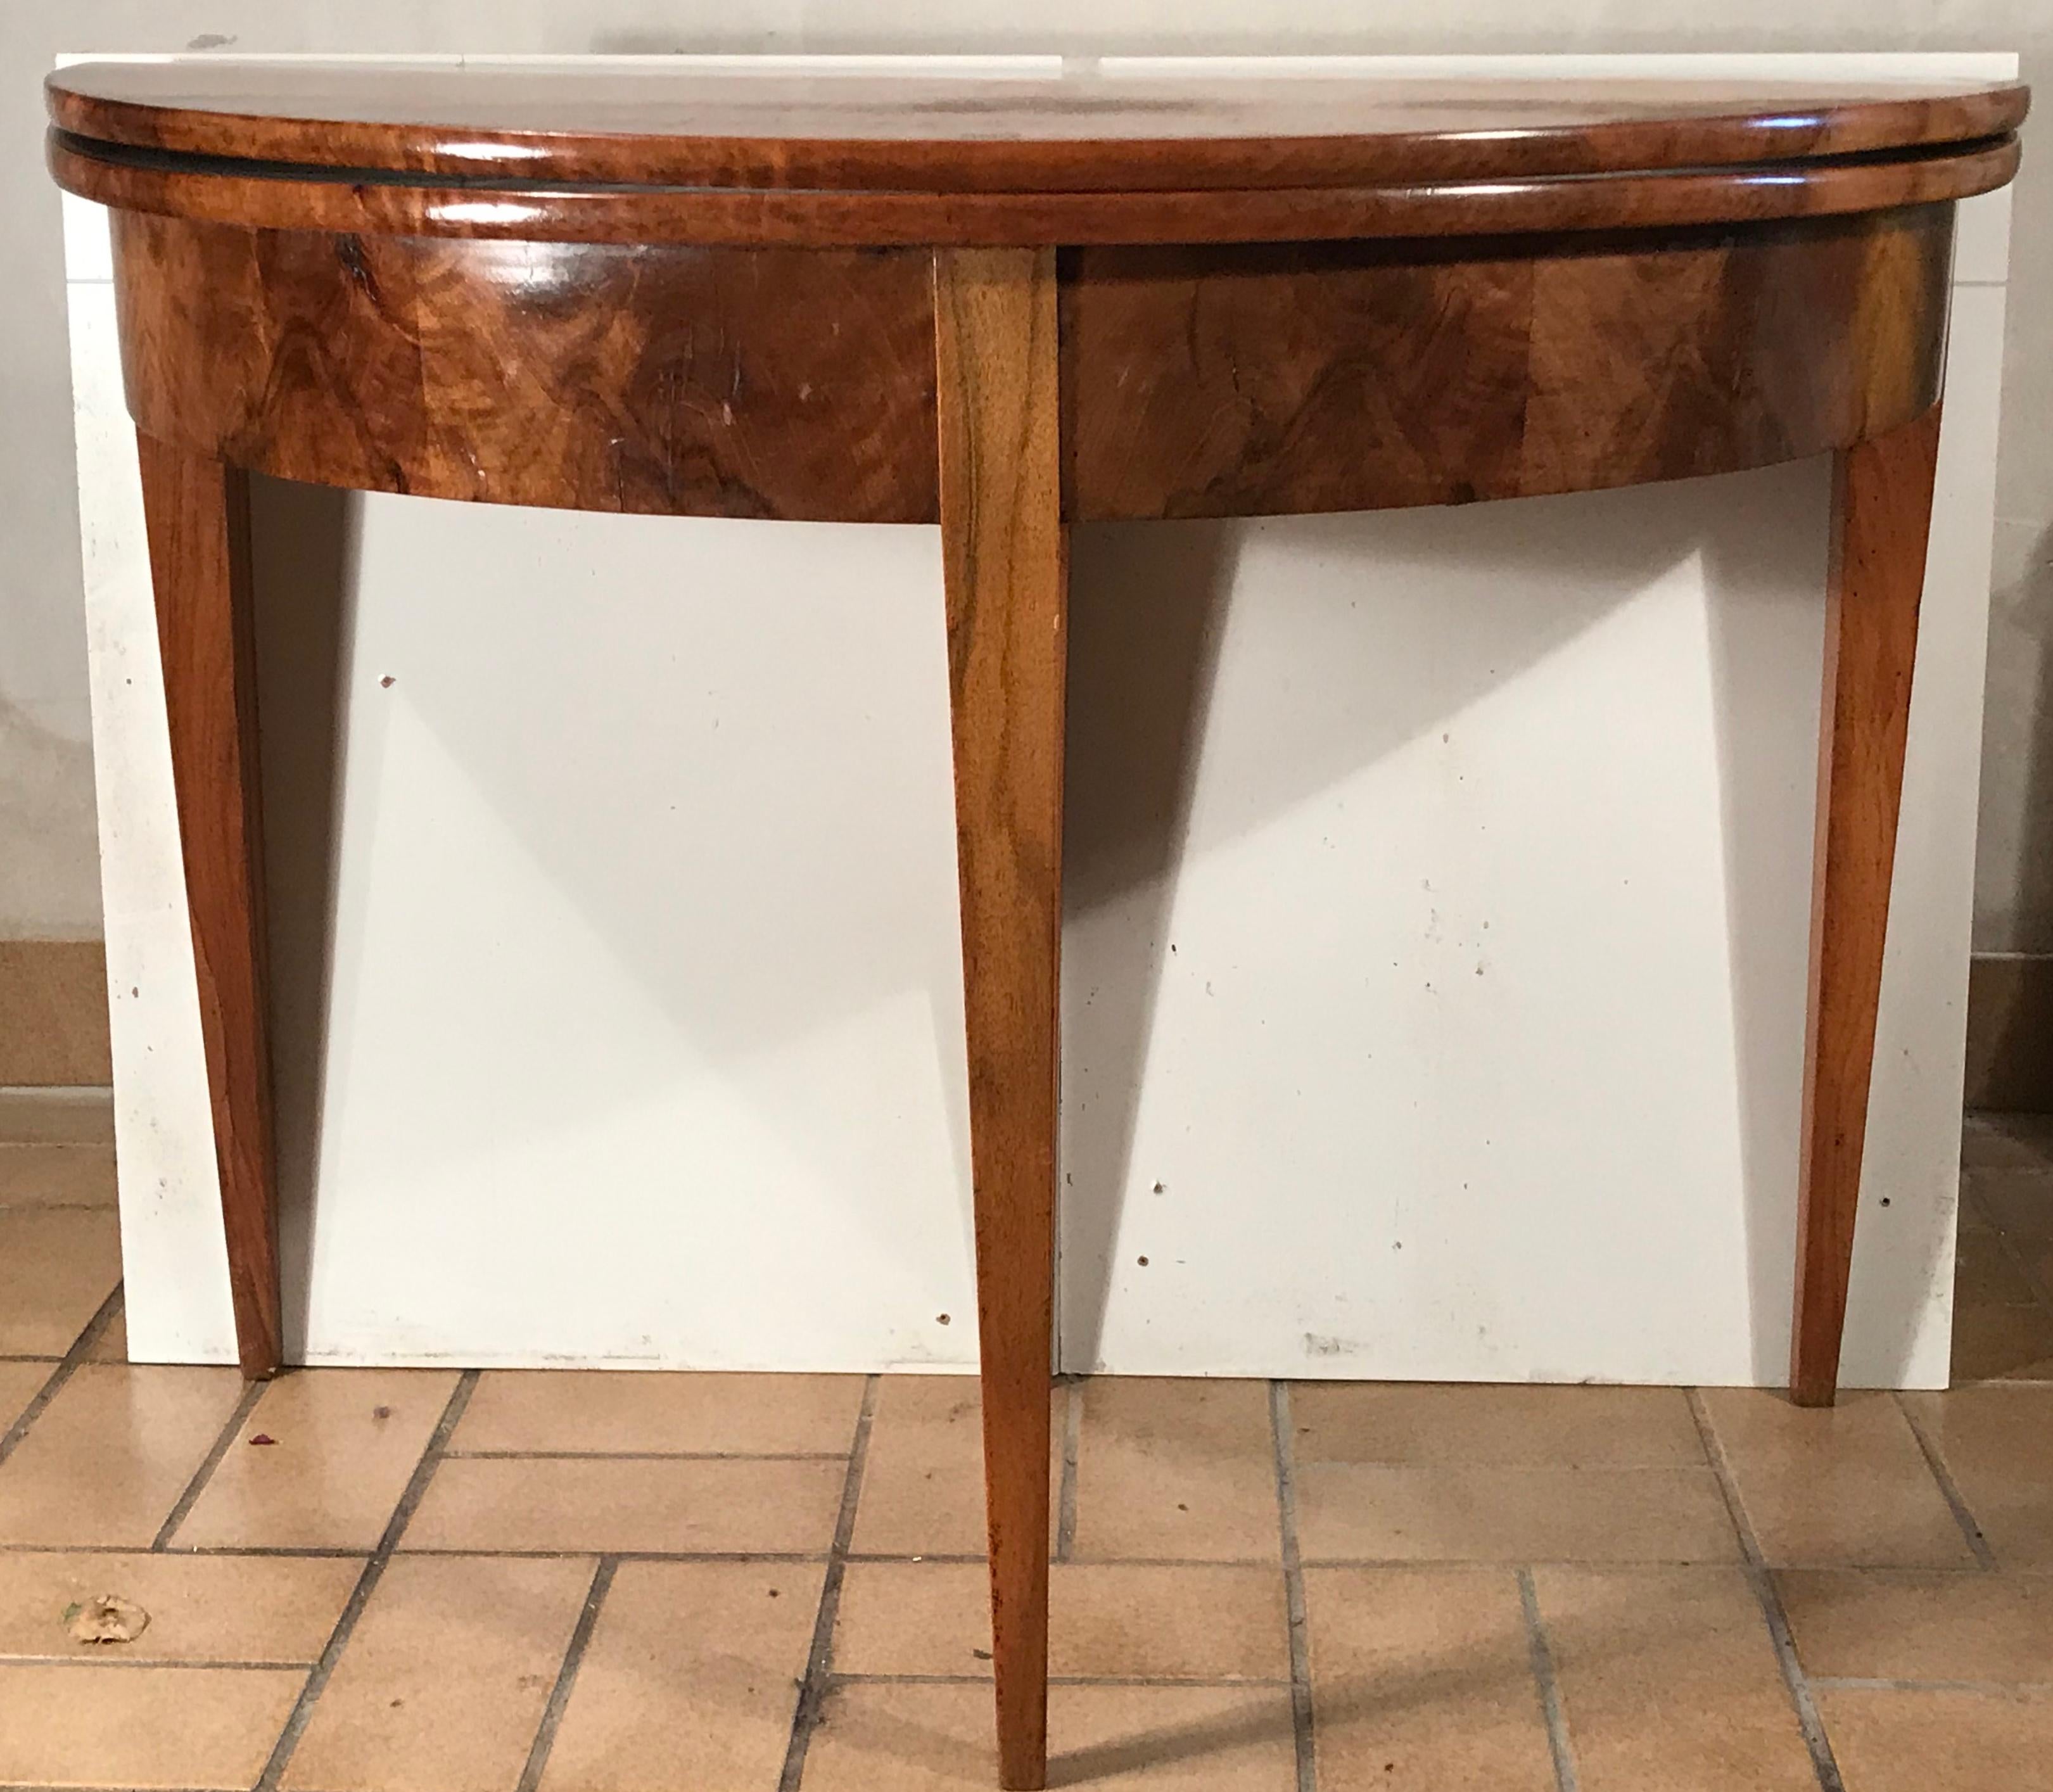 Original Biedermeier demilune table, South German 1820, walnut veneer. The table is in good original condition.
It could be used as a console table in an entry way or a safe spacing dining table in a small apartment with the option to use it folded